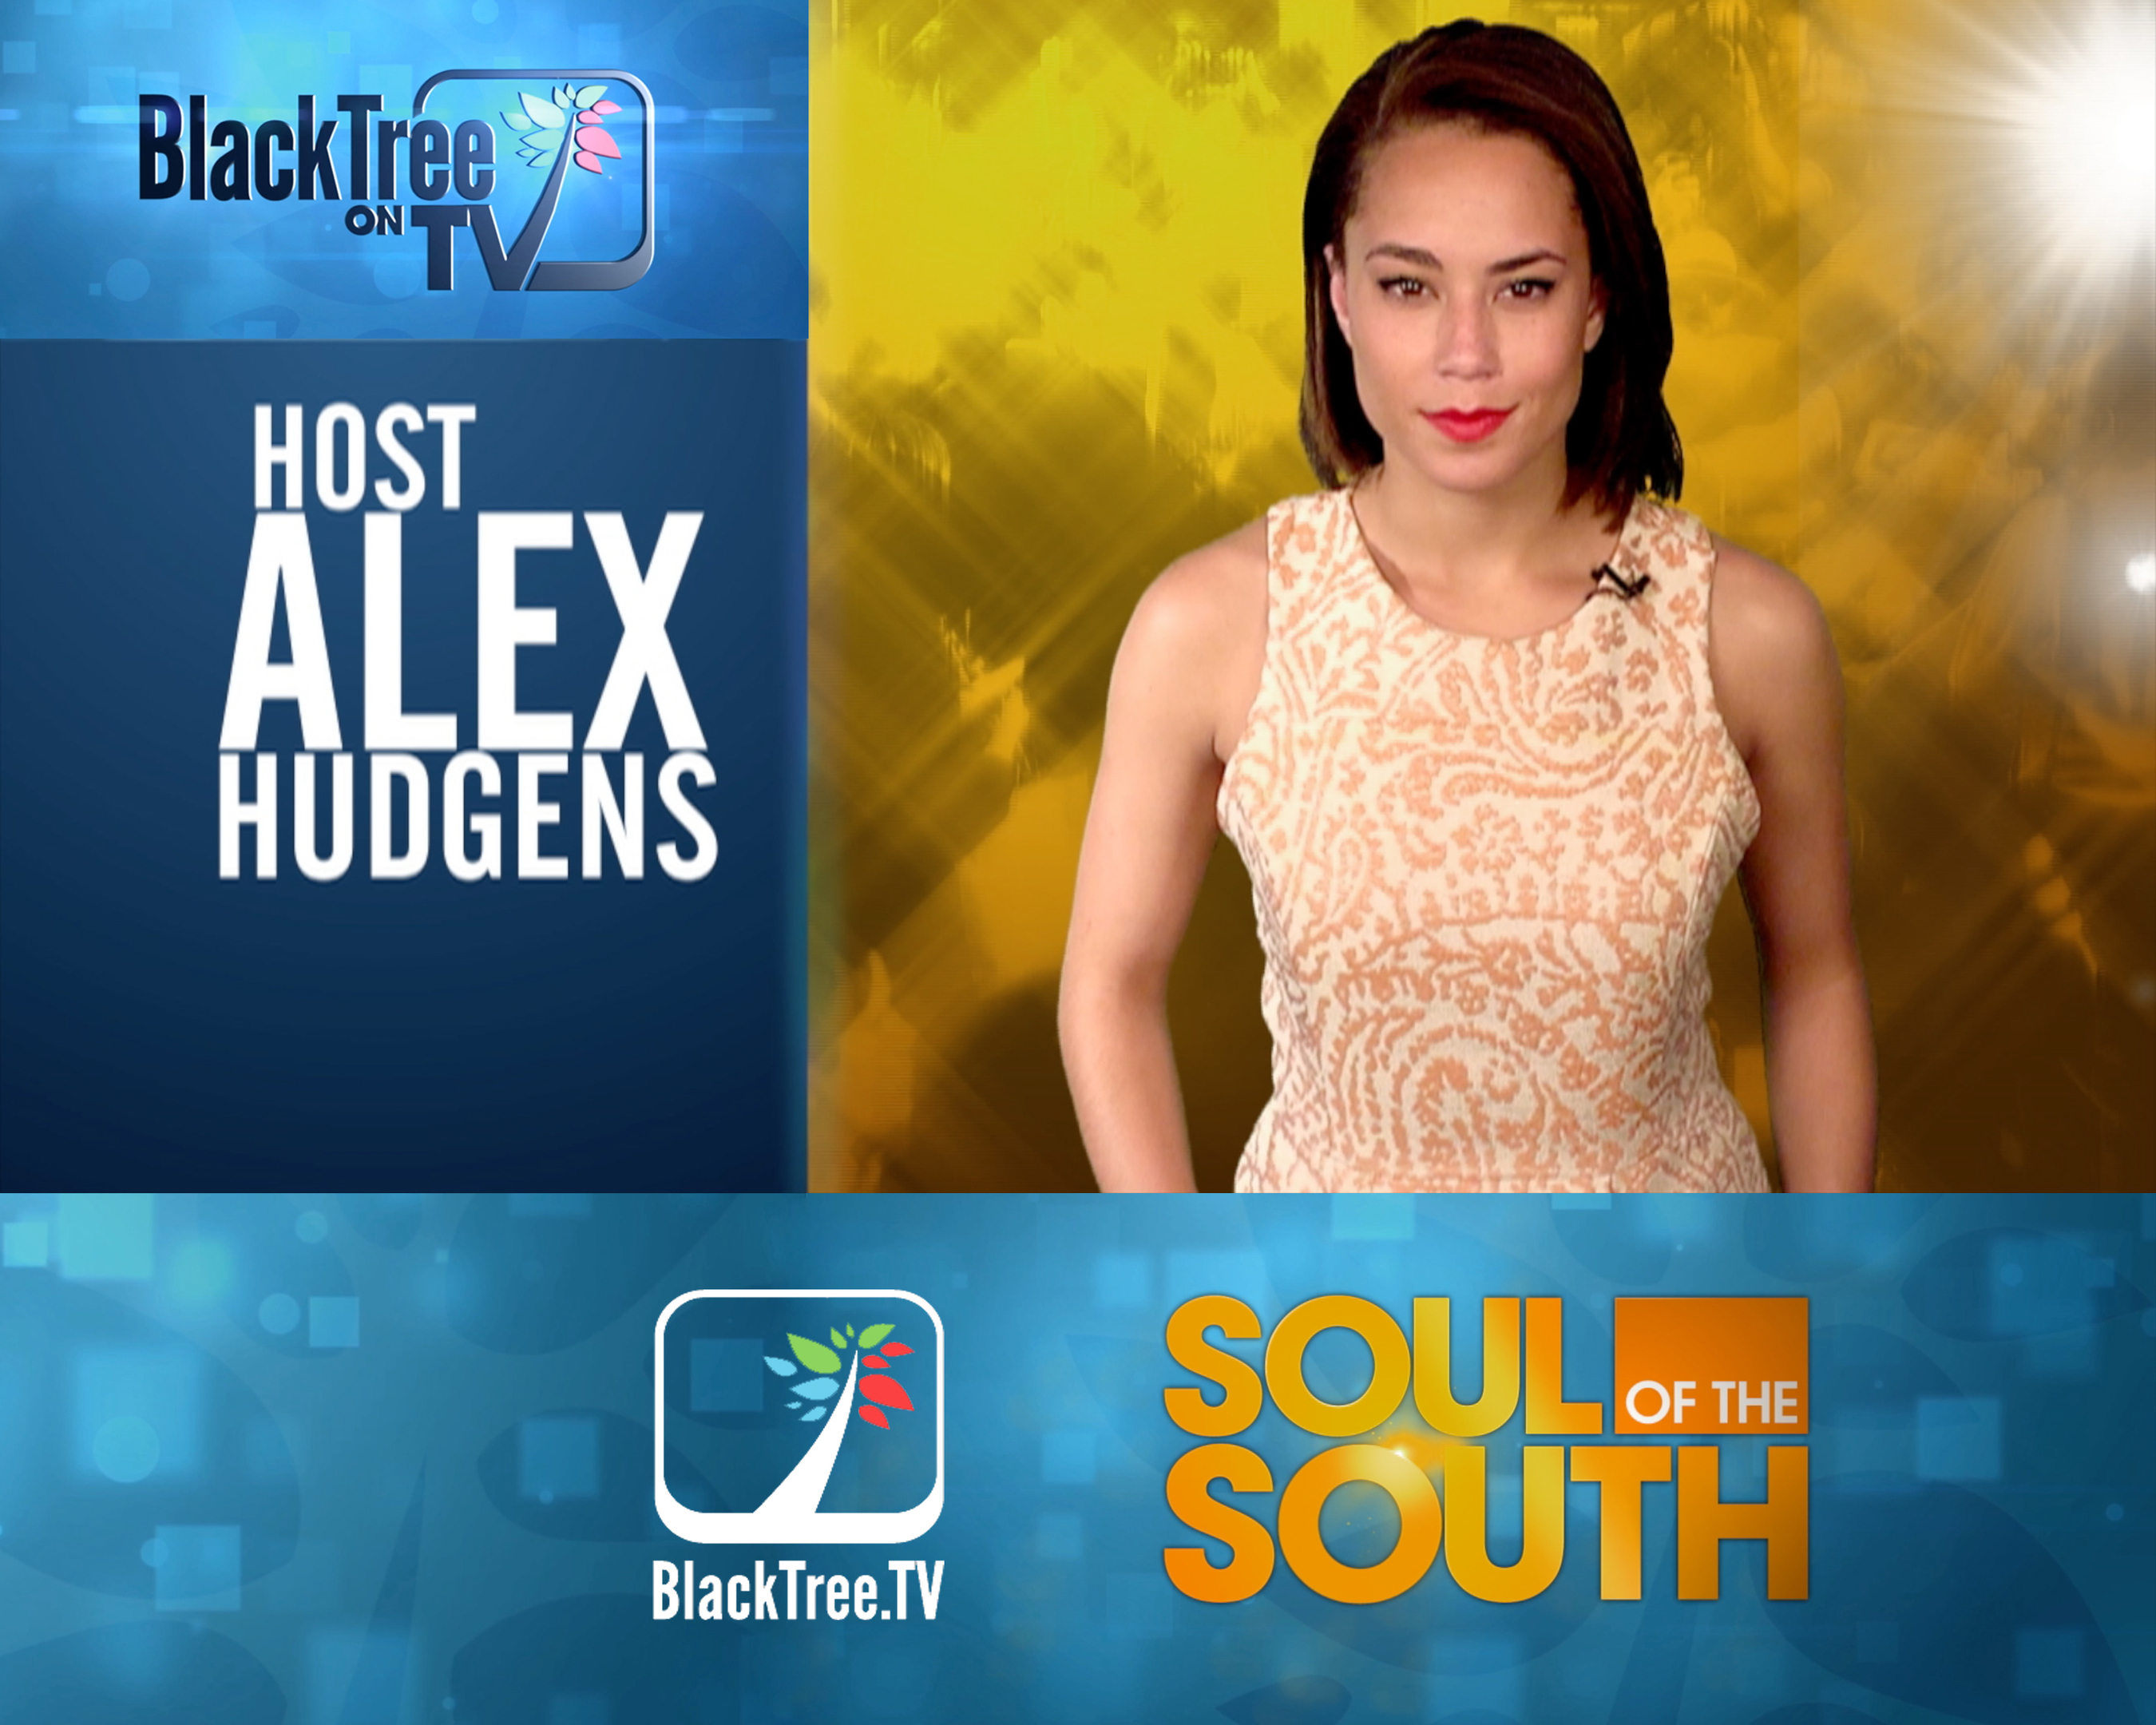 BlackTree TV And Soul Of The South Television Announce TV Show Launch